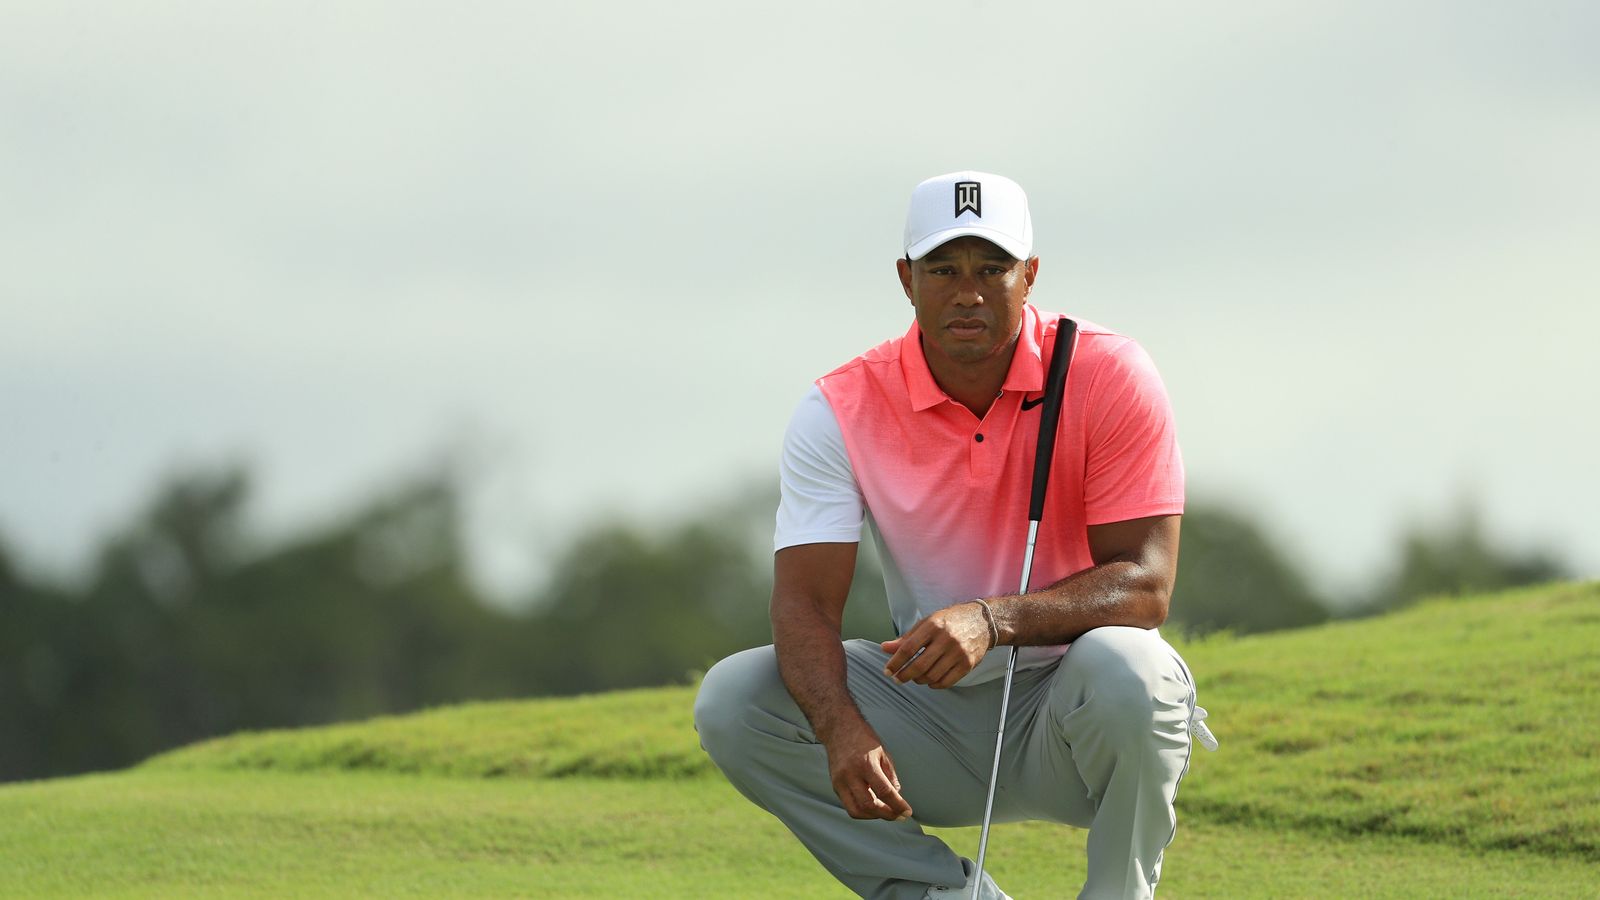 Tiger Woods will be 'openminded' at Hero Golf Challenge, says sports